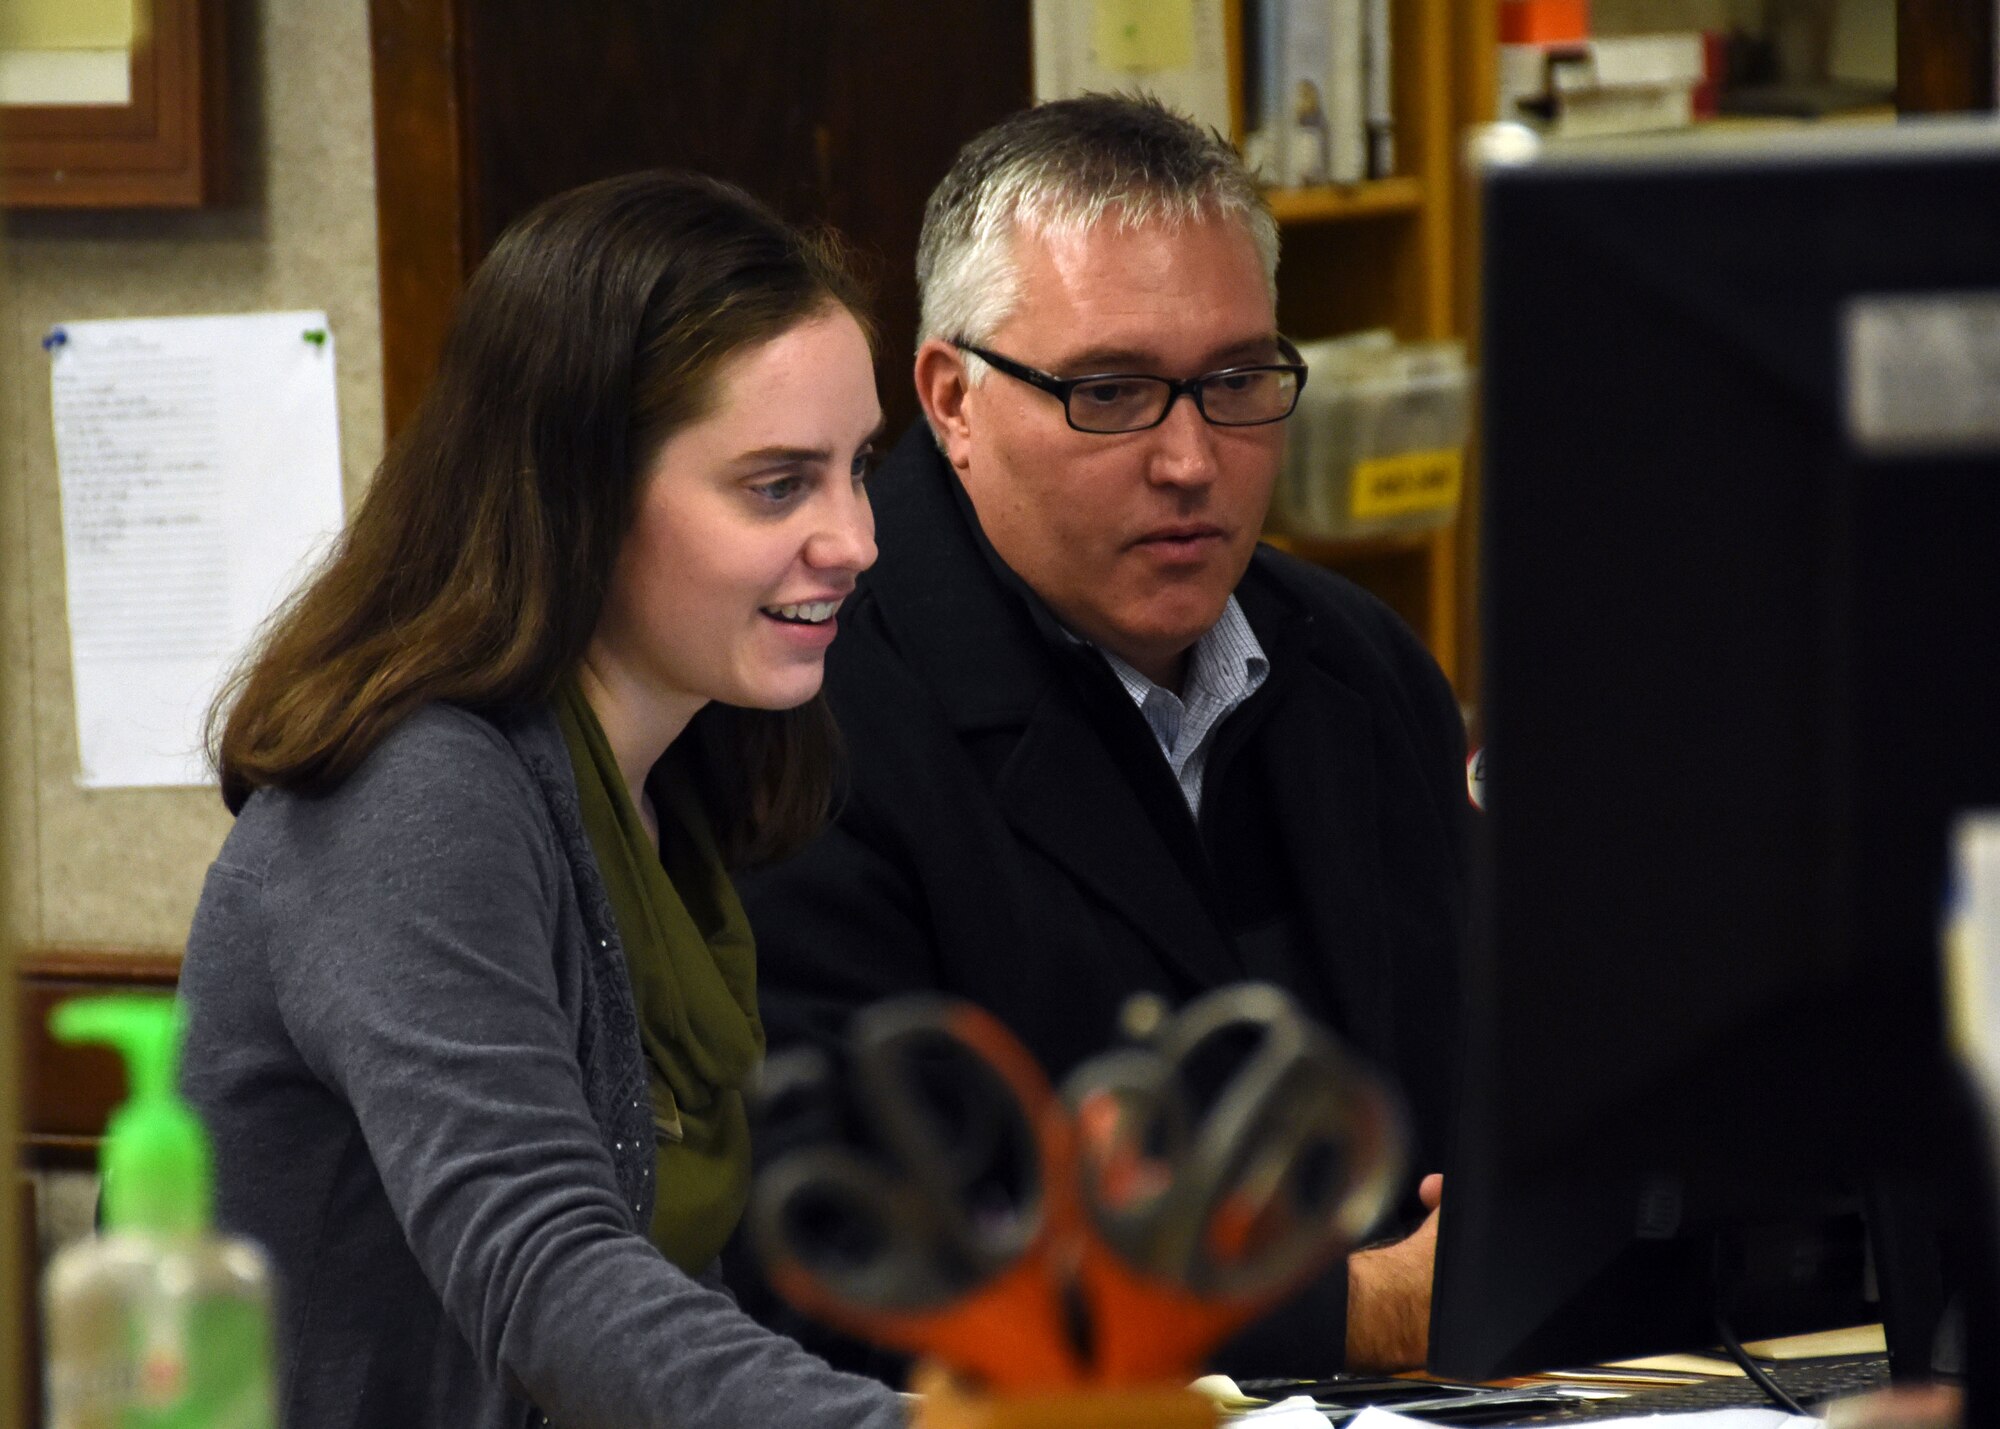 Emily Copeland, 325th Force Support Squadron’s new librarian, and Mark Rix, 325th Force Support Squadron Force Development flight chief, process data on Copeland’s computer at Tyndall Air Force Base, Fla., Jan. 18, 2018. As the new librarian, Copeland will wear many hats: facility manager, resource manager, information technology equipment custodian and activities director. The Tyndall library supports the community by providing education, reference and reading materials for Airmen and family members of all ages. (U.S. Air Force photo by Airman 1st Class Isaiah J. Soliz/Released)